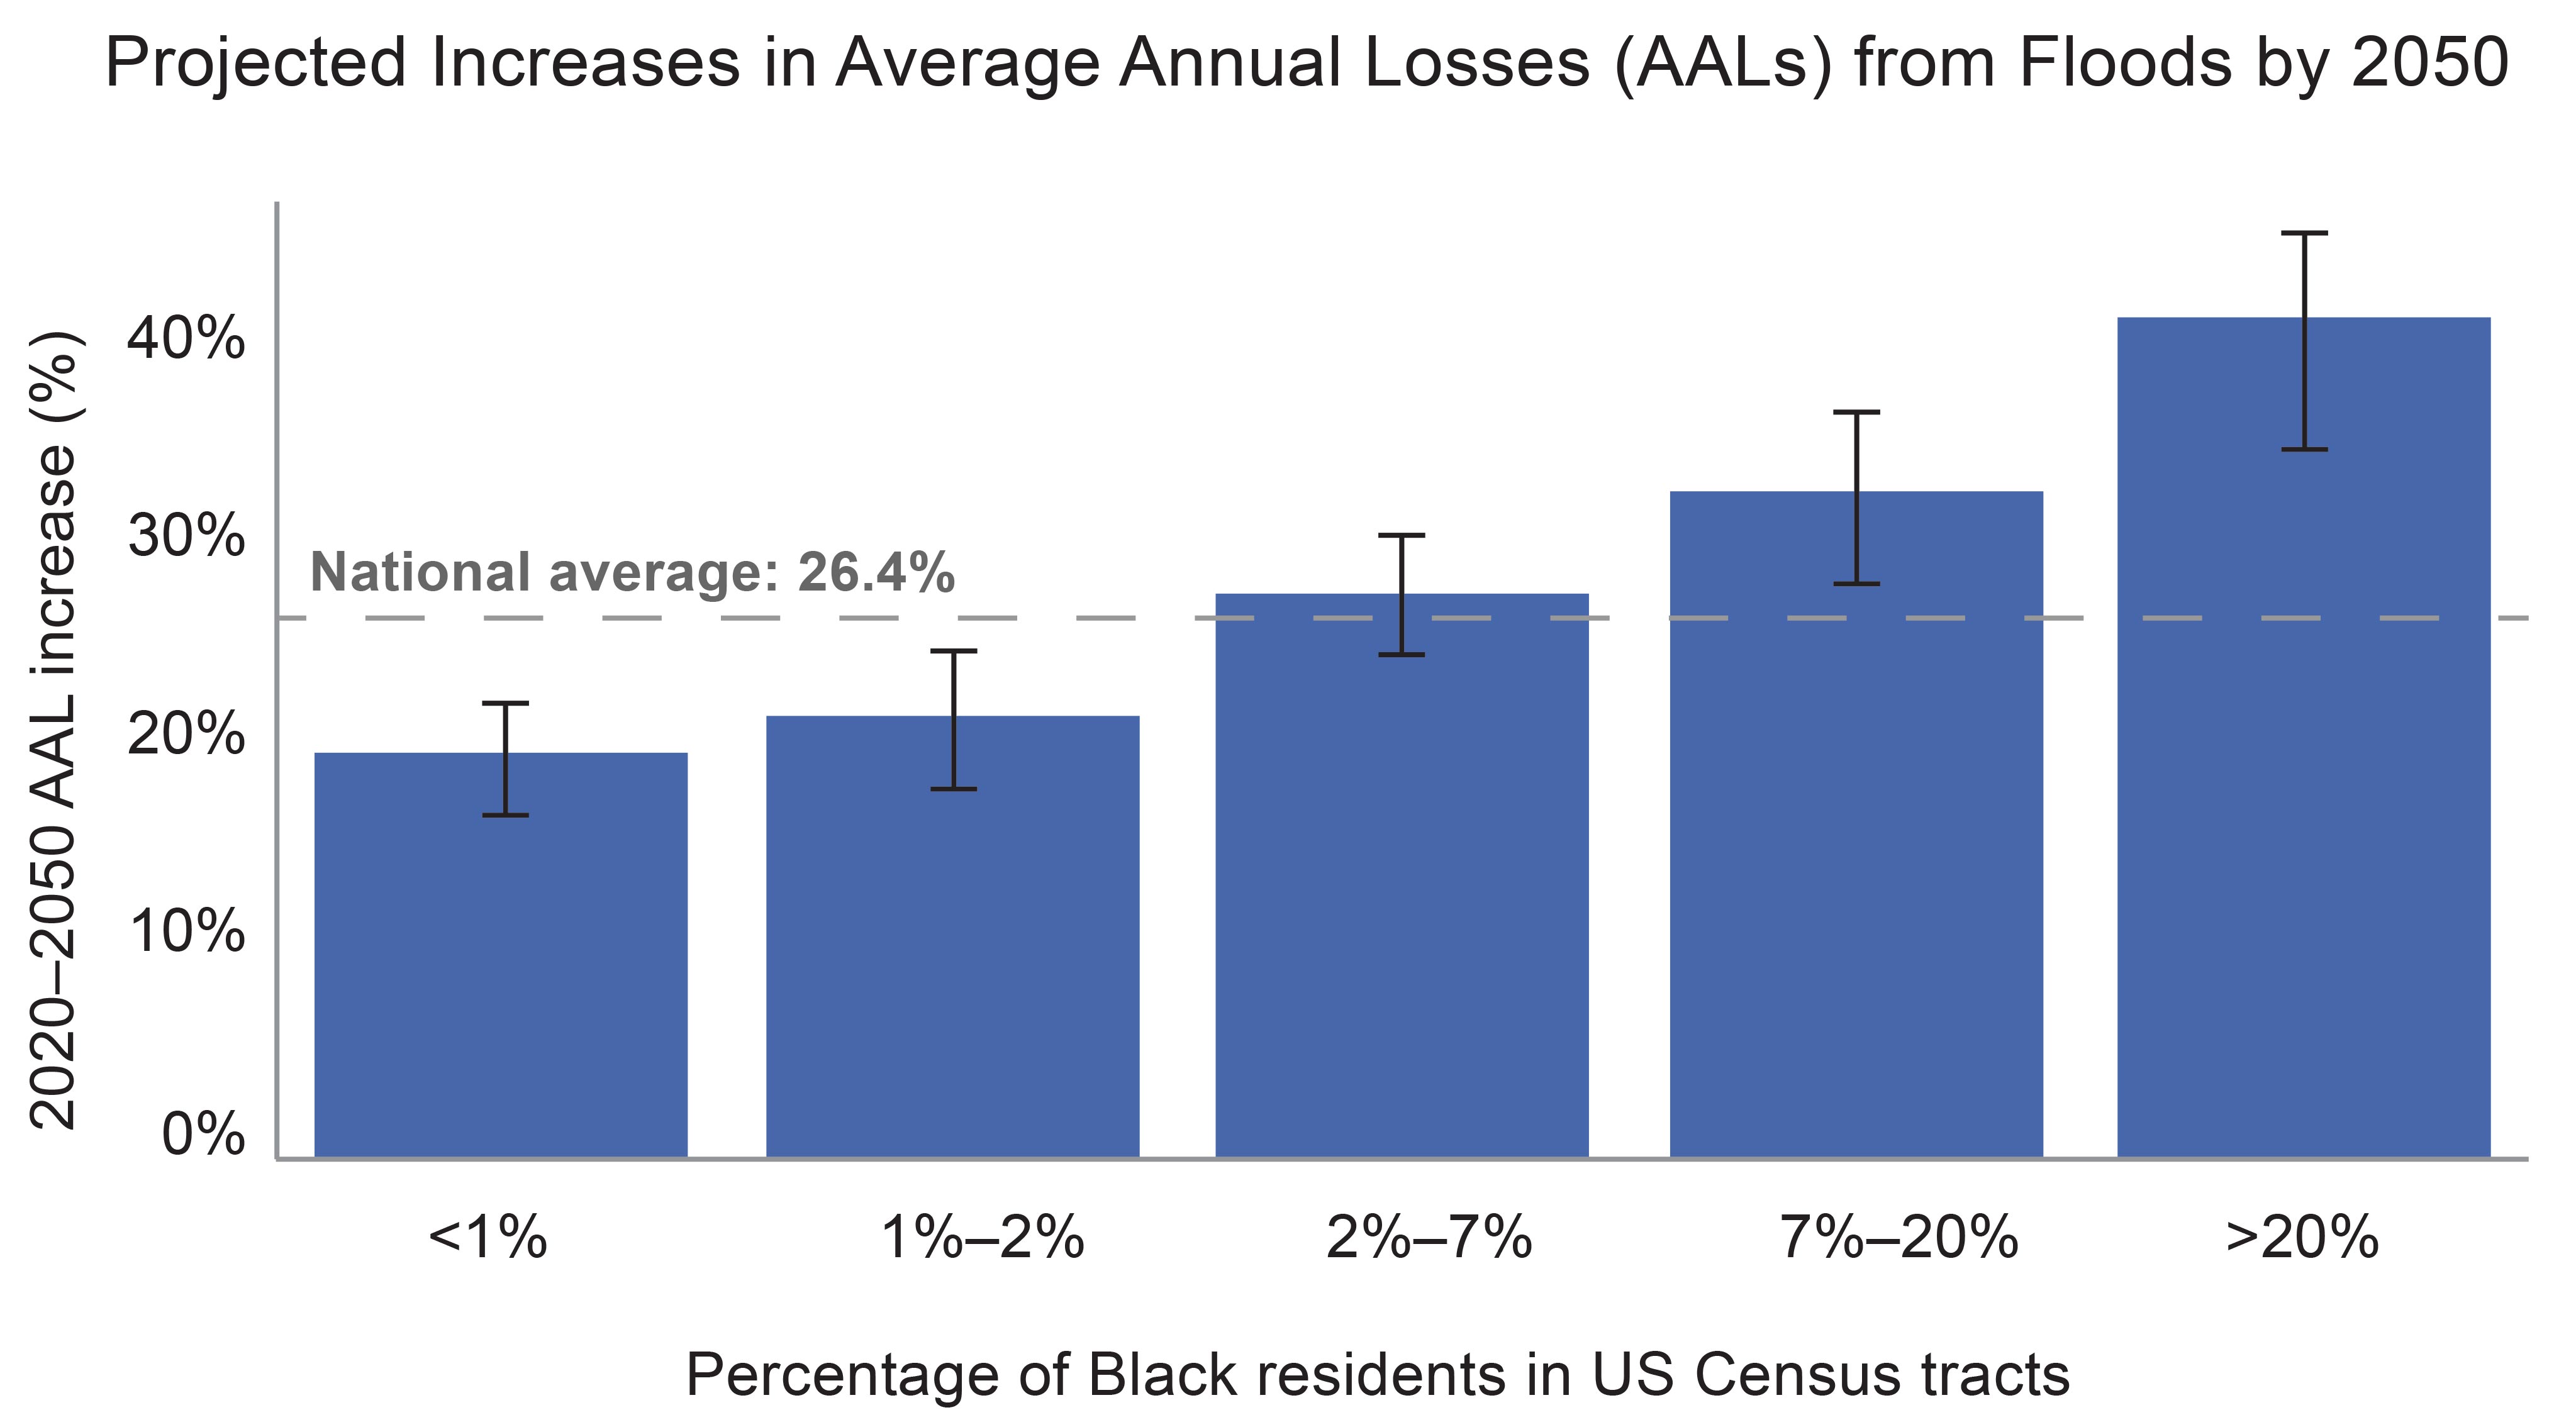 Projected Increases in Average Annual Losses (AALs) from Floods by 2050